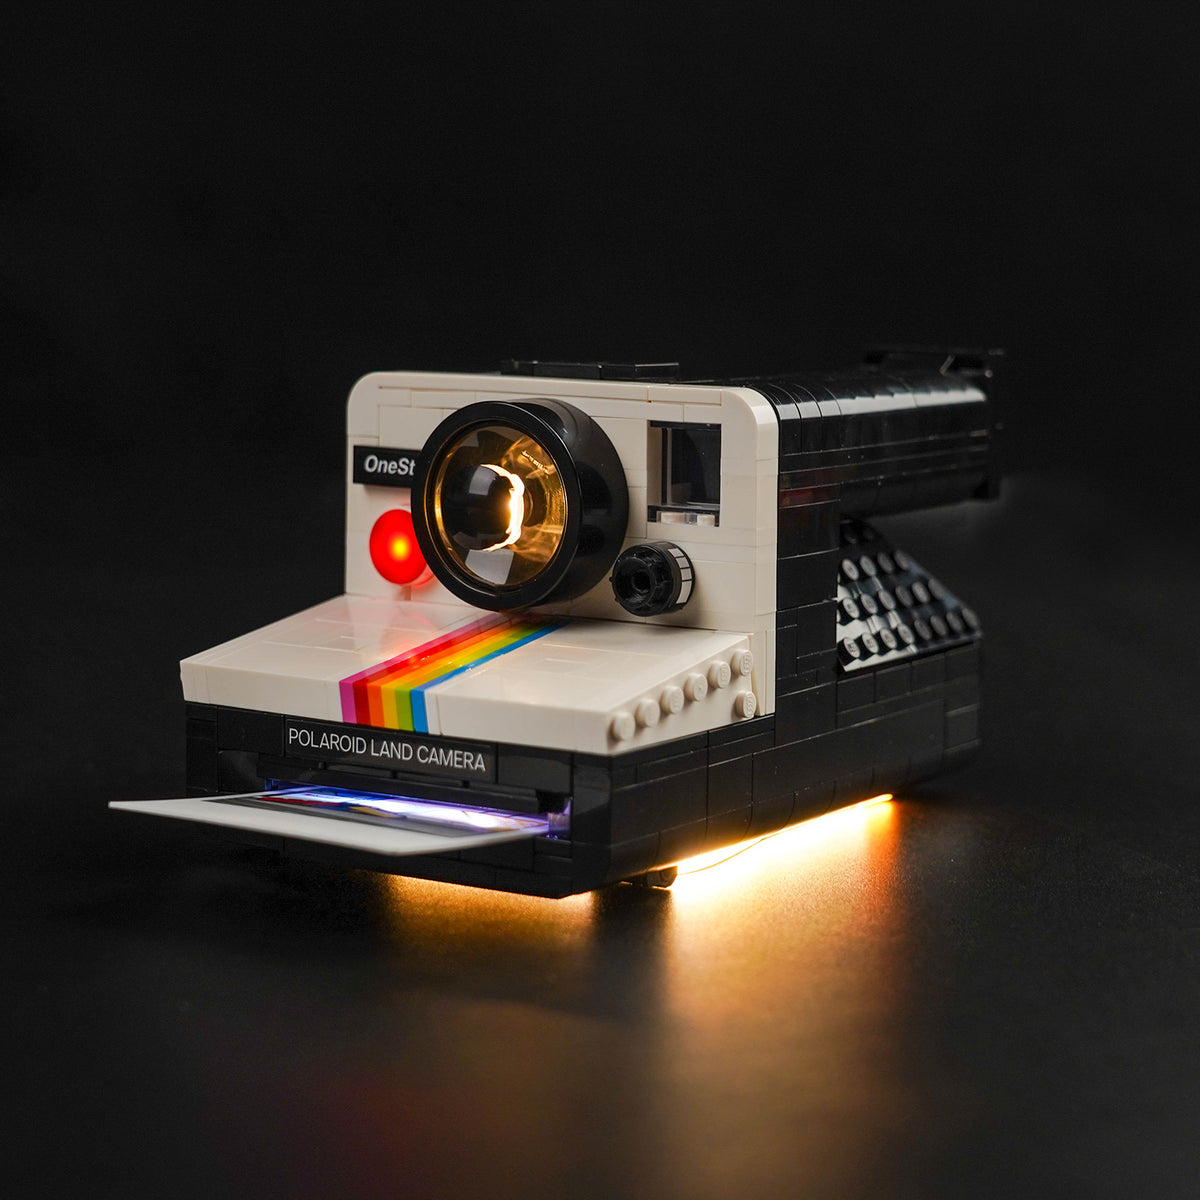  LEGO Ideas Polaroid OneStep SX-70 Camera Building Kit, Creative  Gift for Photographers, Collectible Brick-Built Vintage Polaroid Camera  Model, Creative Activity or Gift for Adults, 21345 : Toys & Games